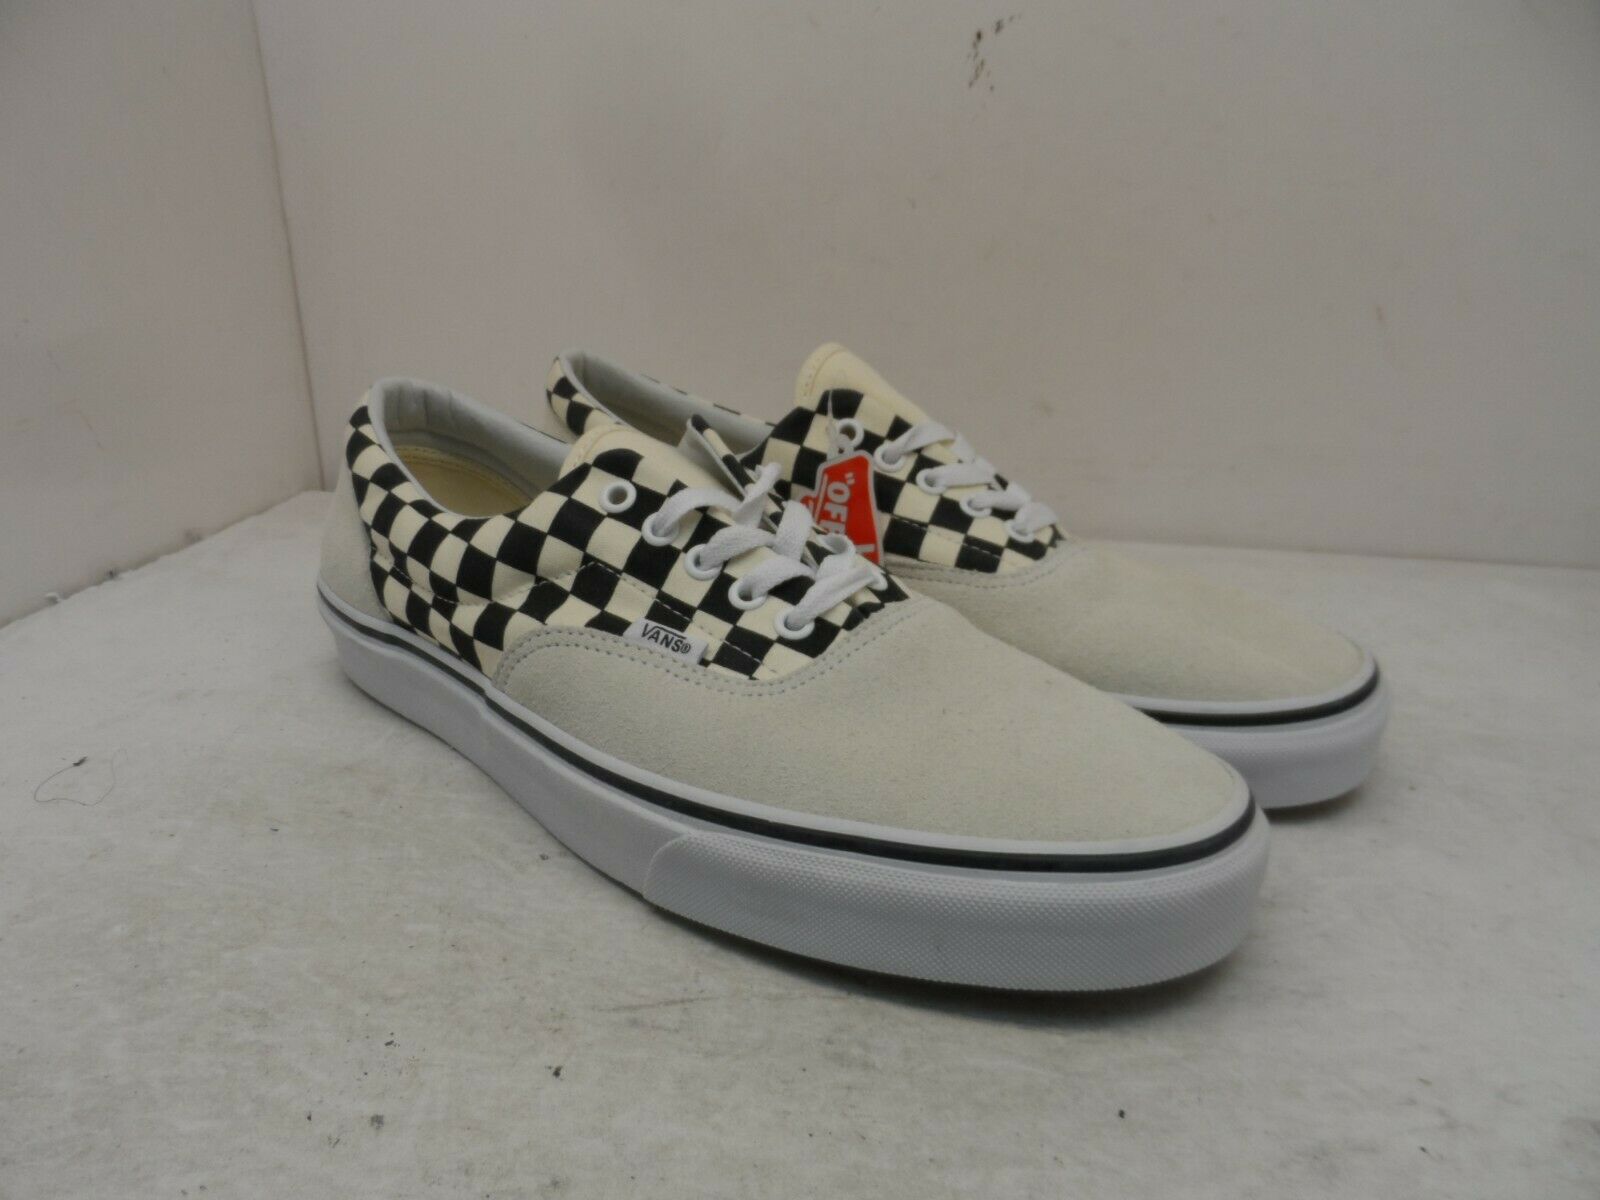 VANS Men's Authentic Lace-Up Skate Casual Shoes Cream/Checkerboard Size 12M